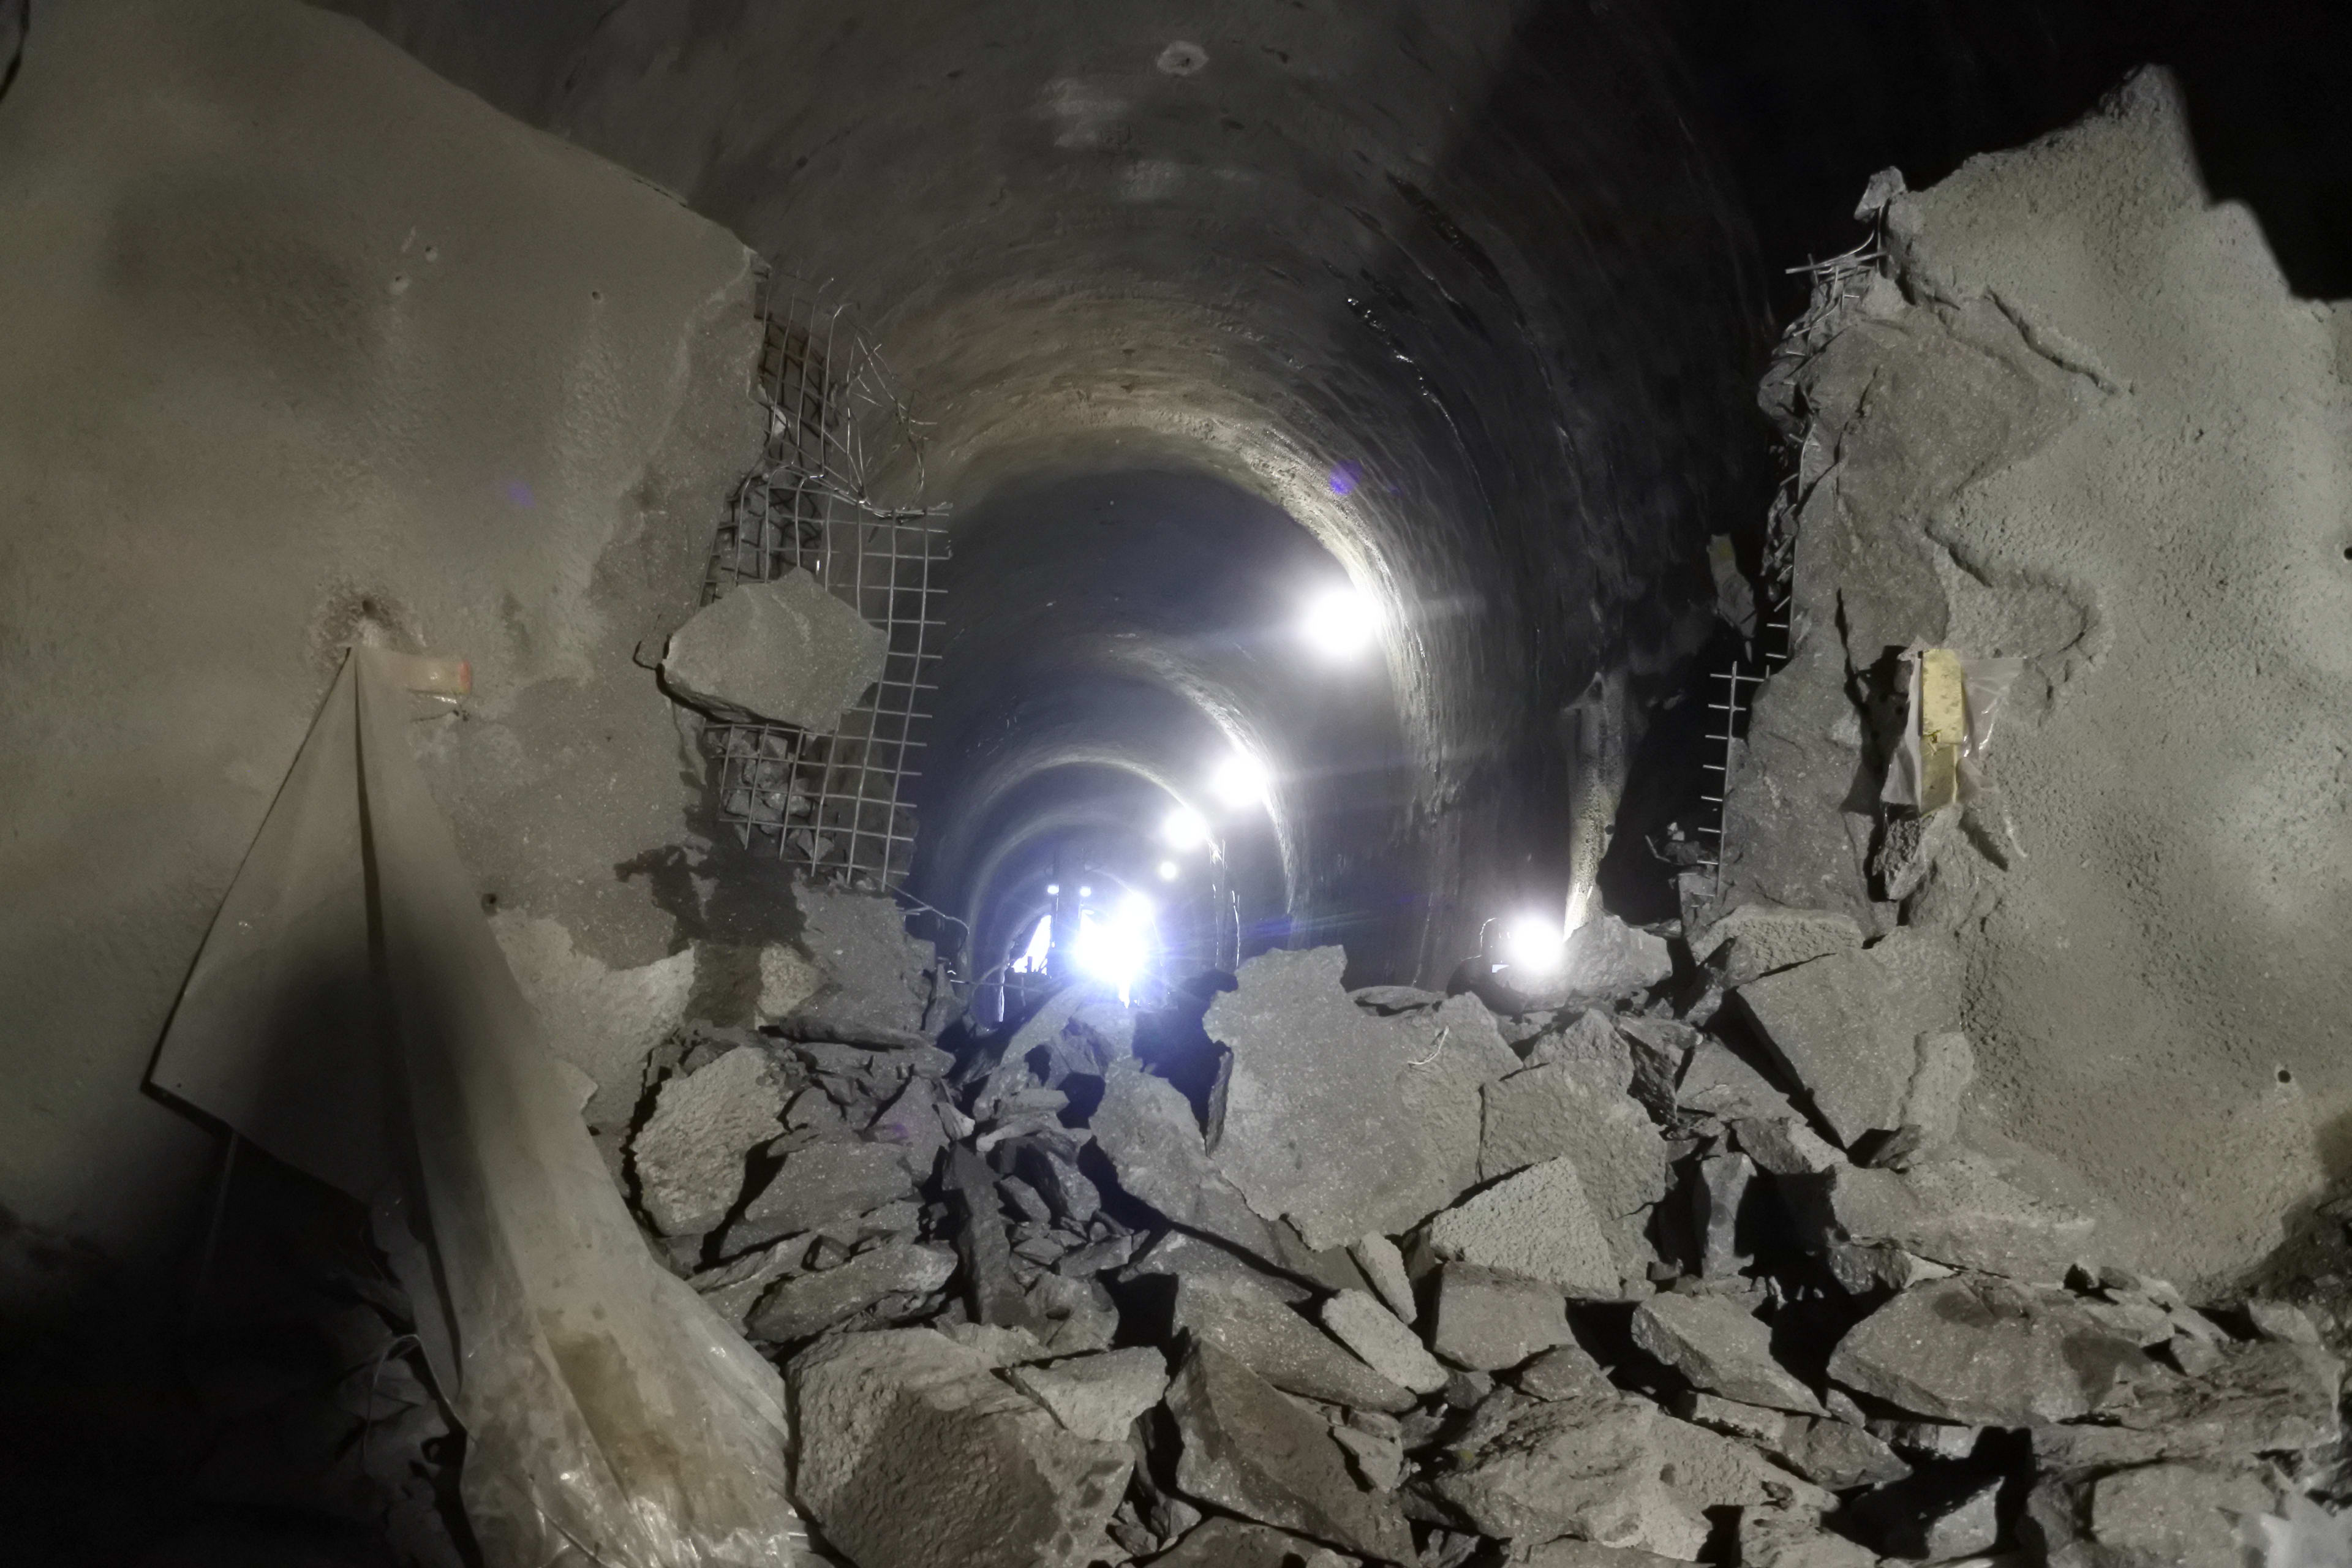 The tunnel is seen with smashed concrete.